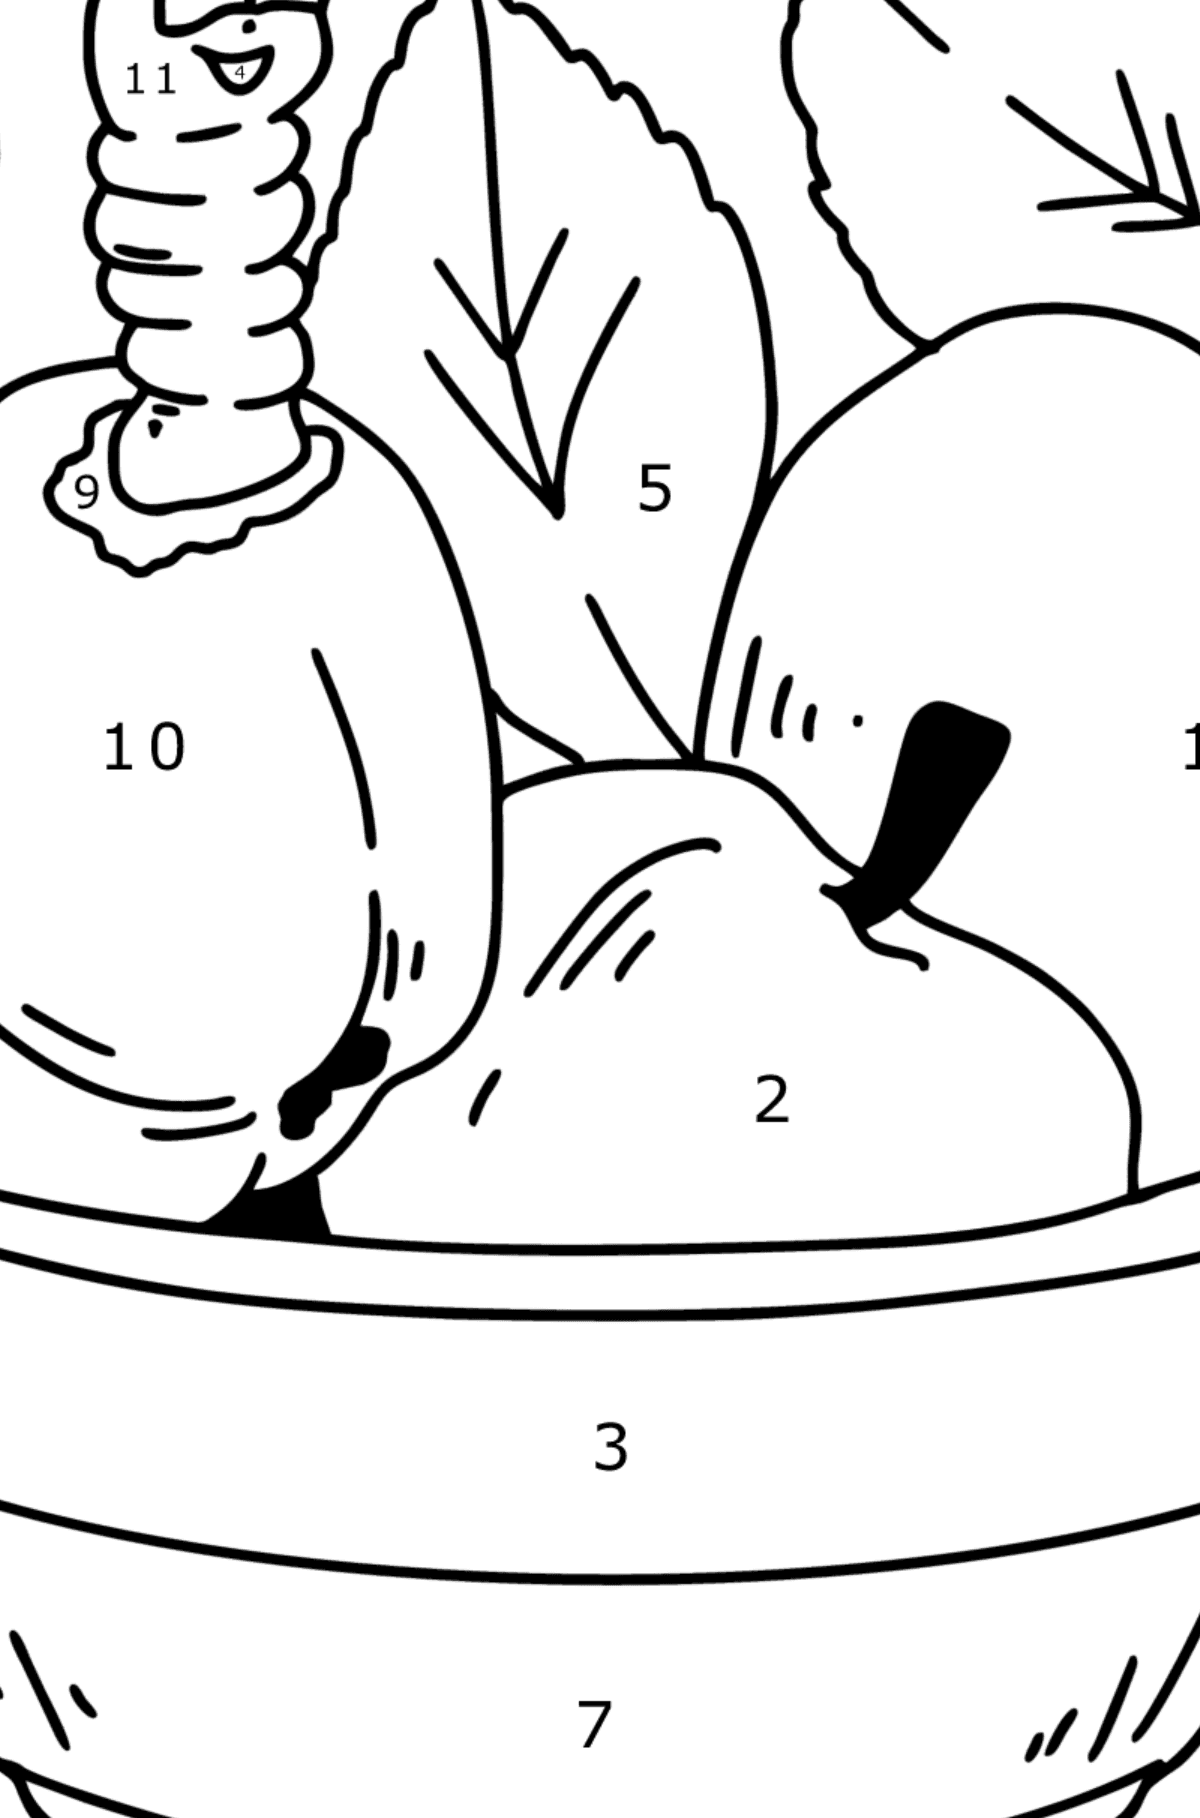 Coloring page Autumn - Apples and Сaterpillar - Coloring by Numbers for Kids